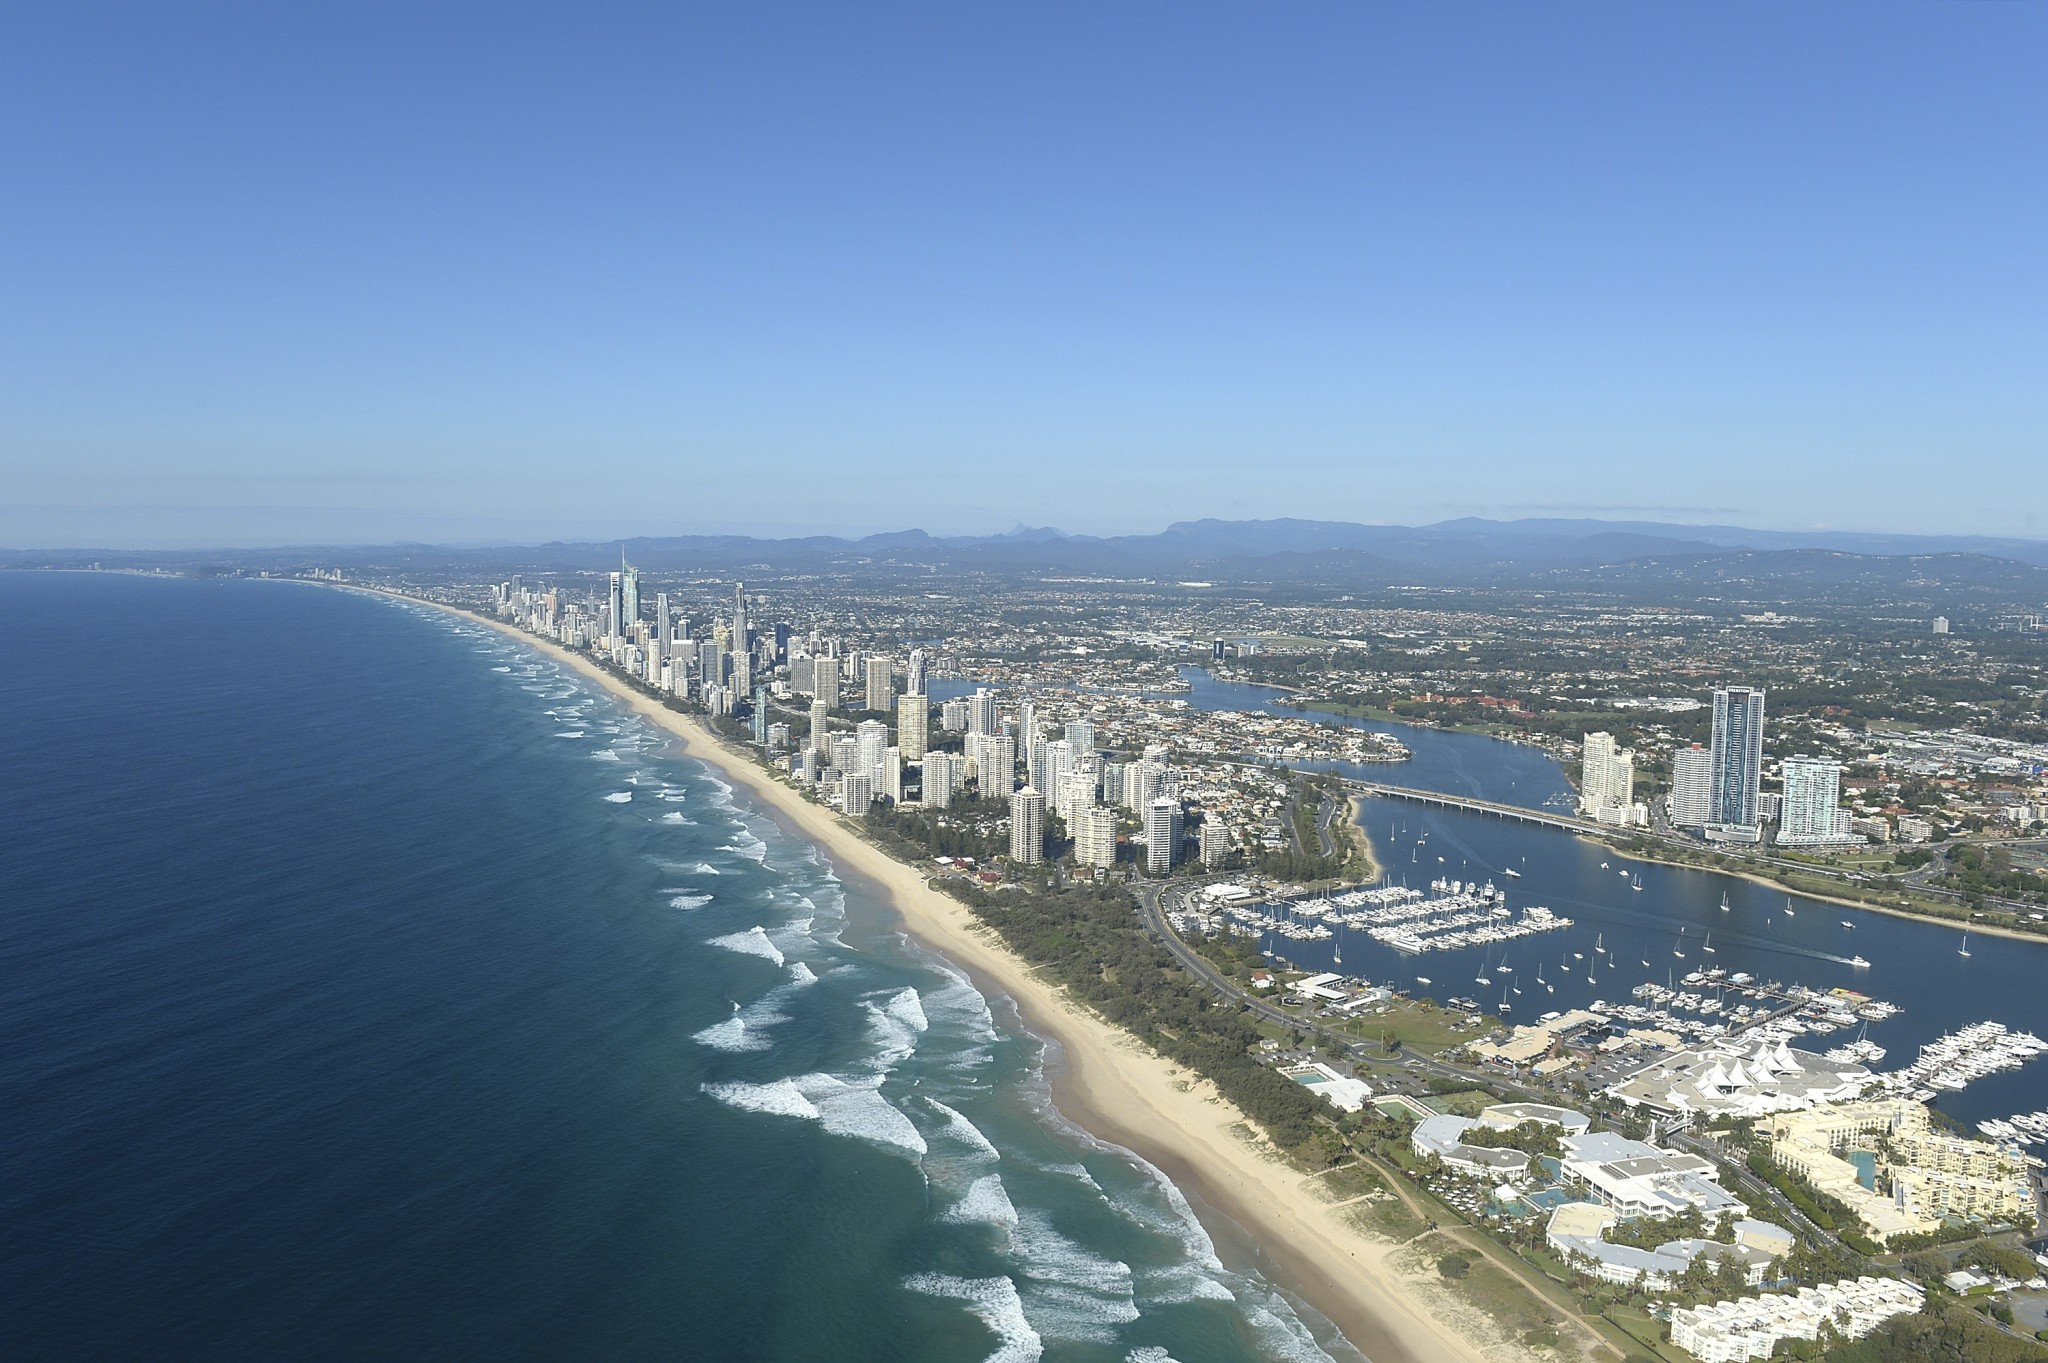 The Rugby League Commonwealth Championship will be held in Redcliffe during the build-up to the 2018 Commonwealth Games in the Gold Coast ©Getty Images